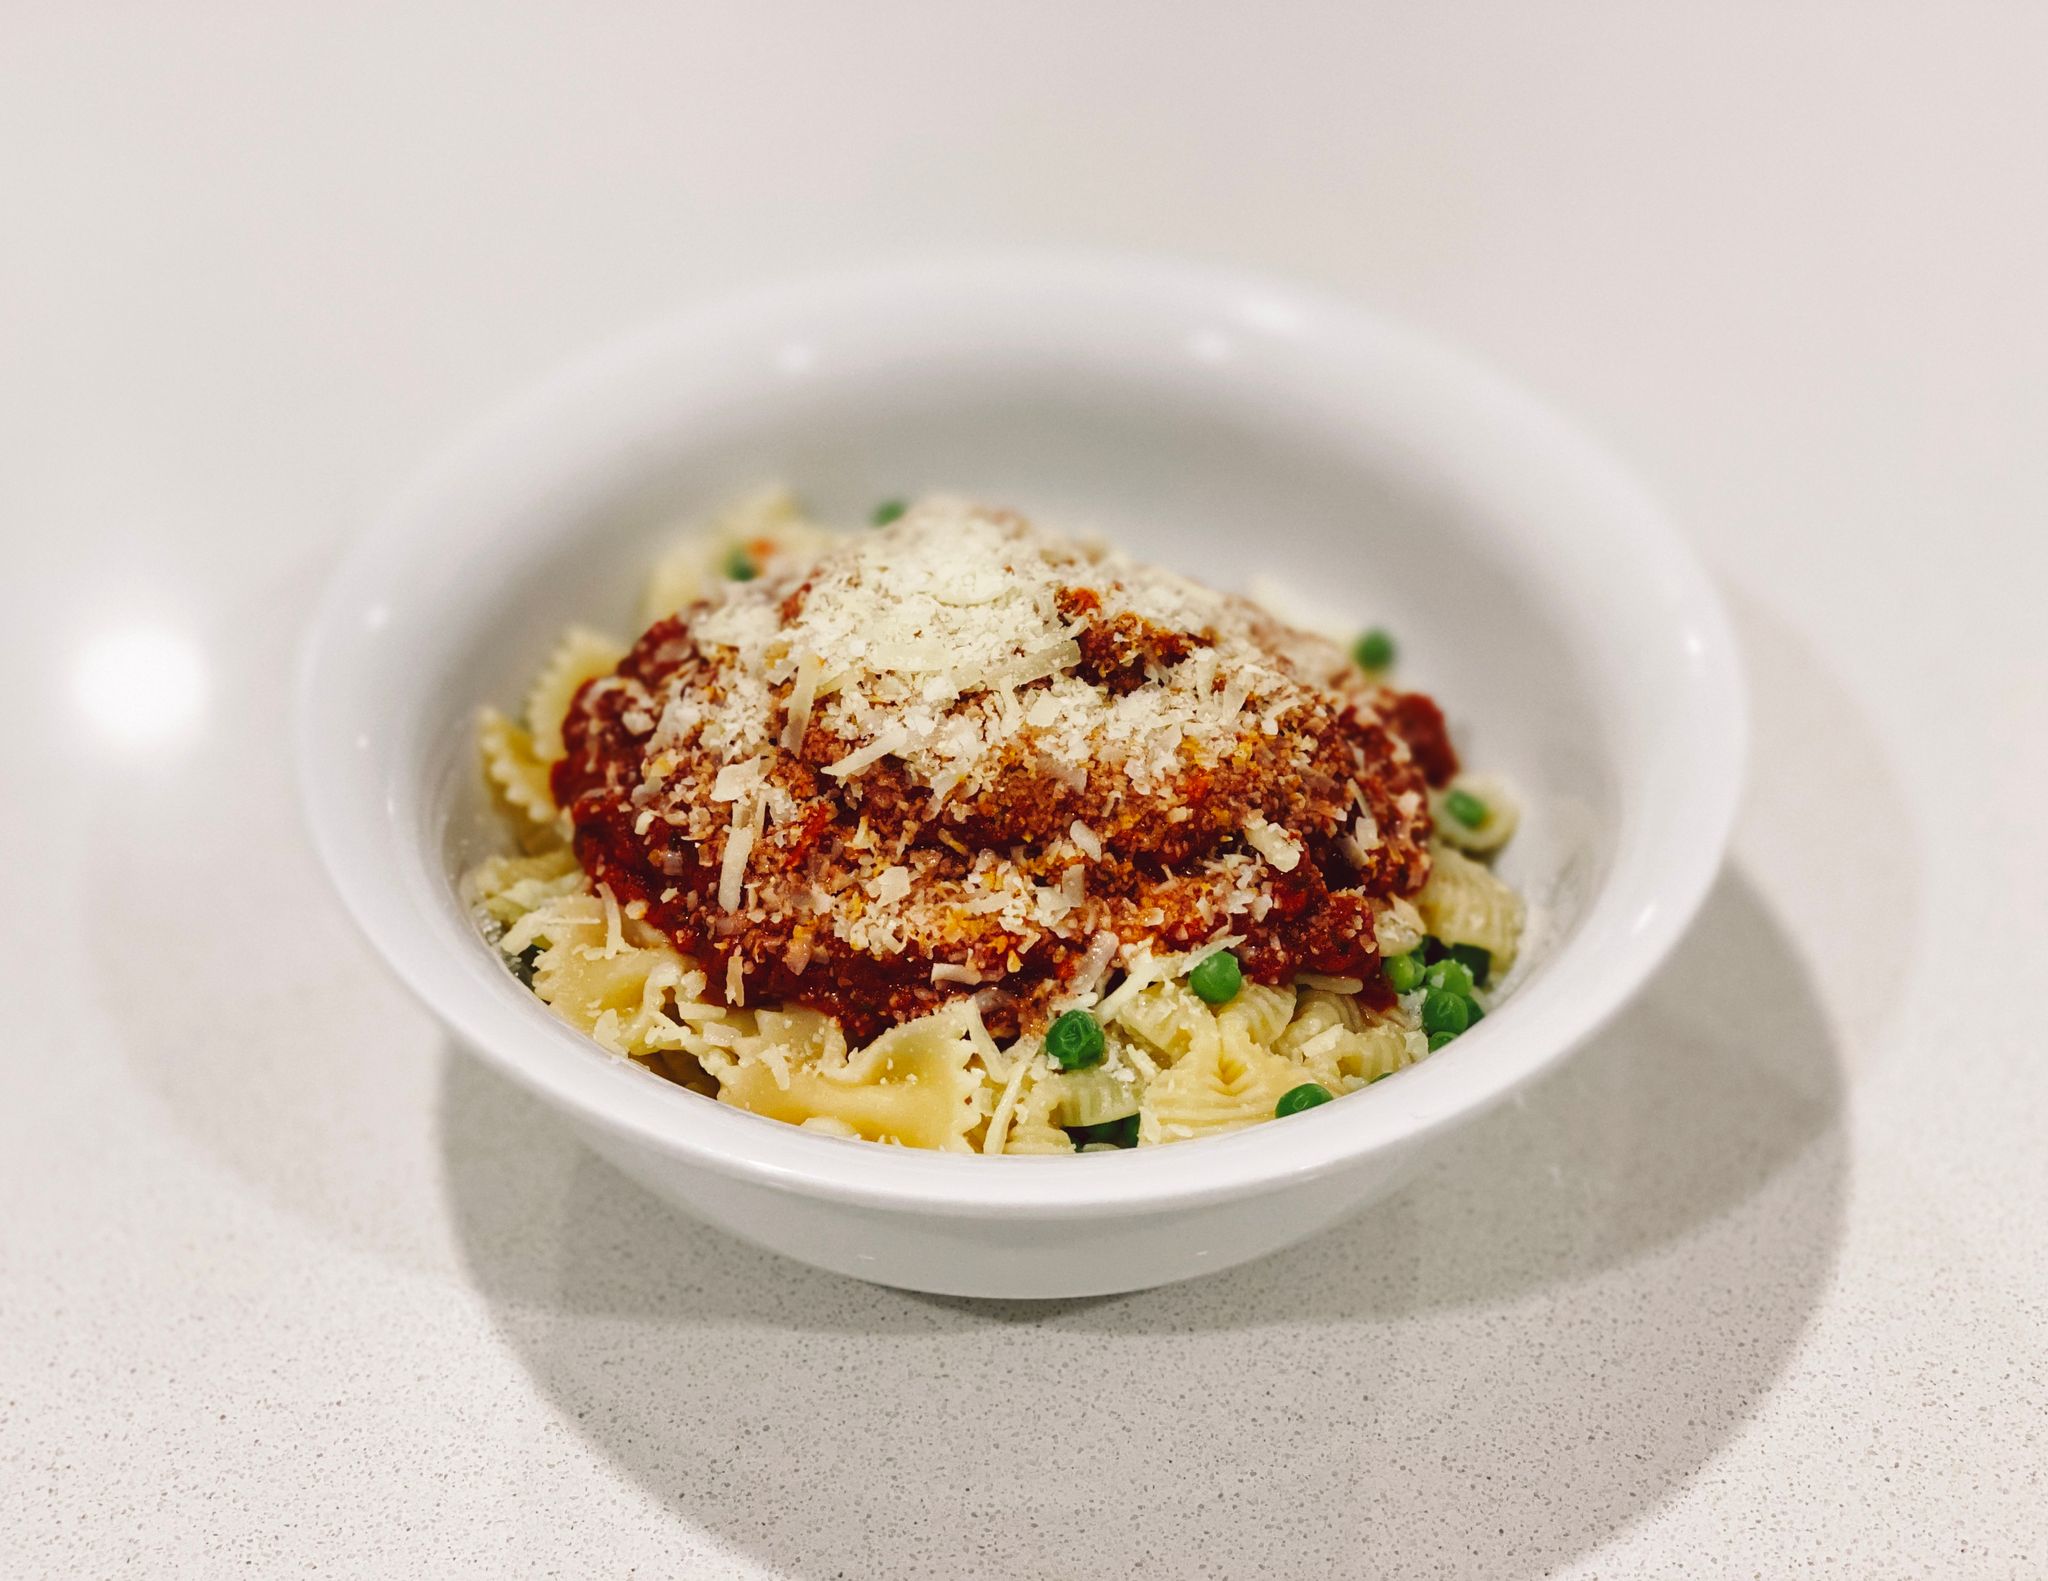 A photo of a bowl of bow-tie pasta with peas mixed in, with a big helping of tomato pasta sauce on top, and the whole thing topped by grated Parmesan cheese.